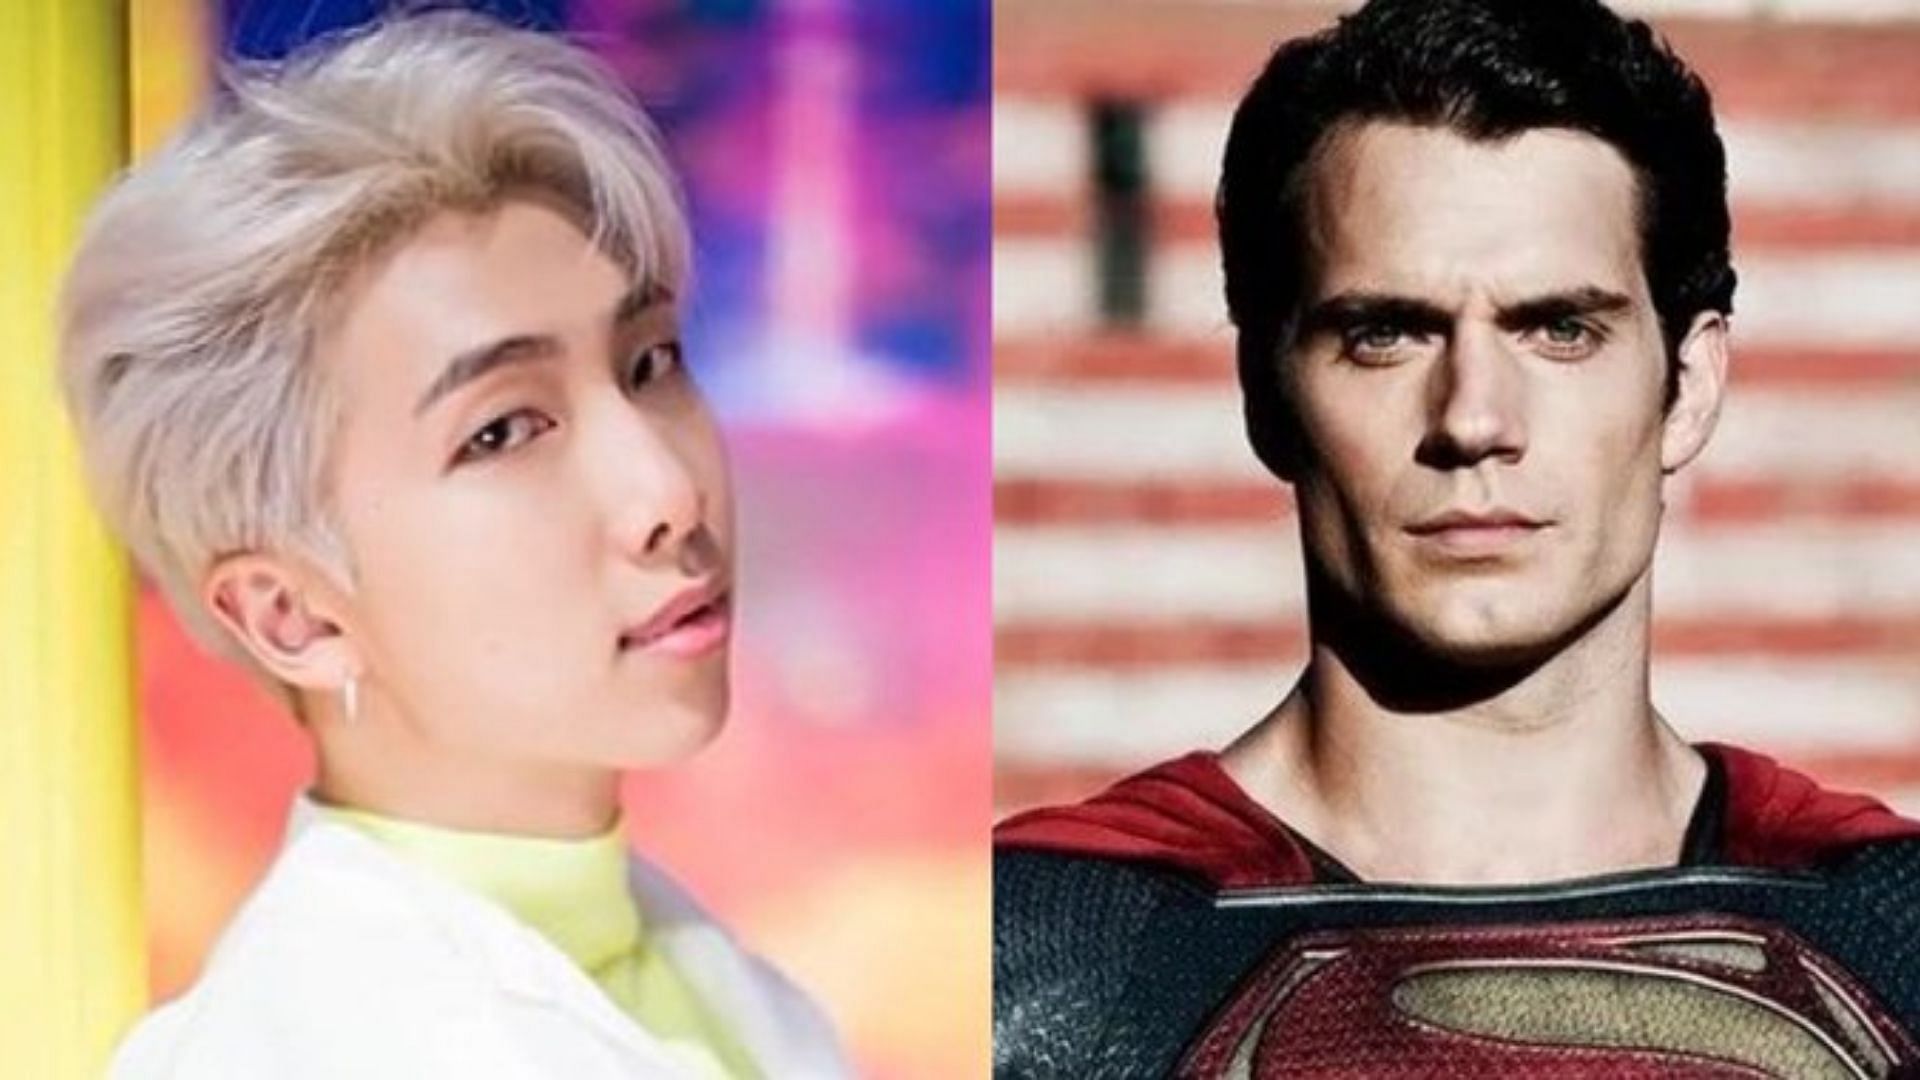 BTS&#039; RM topples Henry Cavill to win the title of the most Handsome man (Image via Twitter/ @ThePollLady)